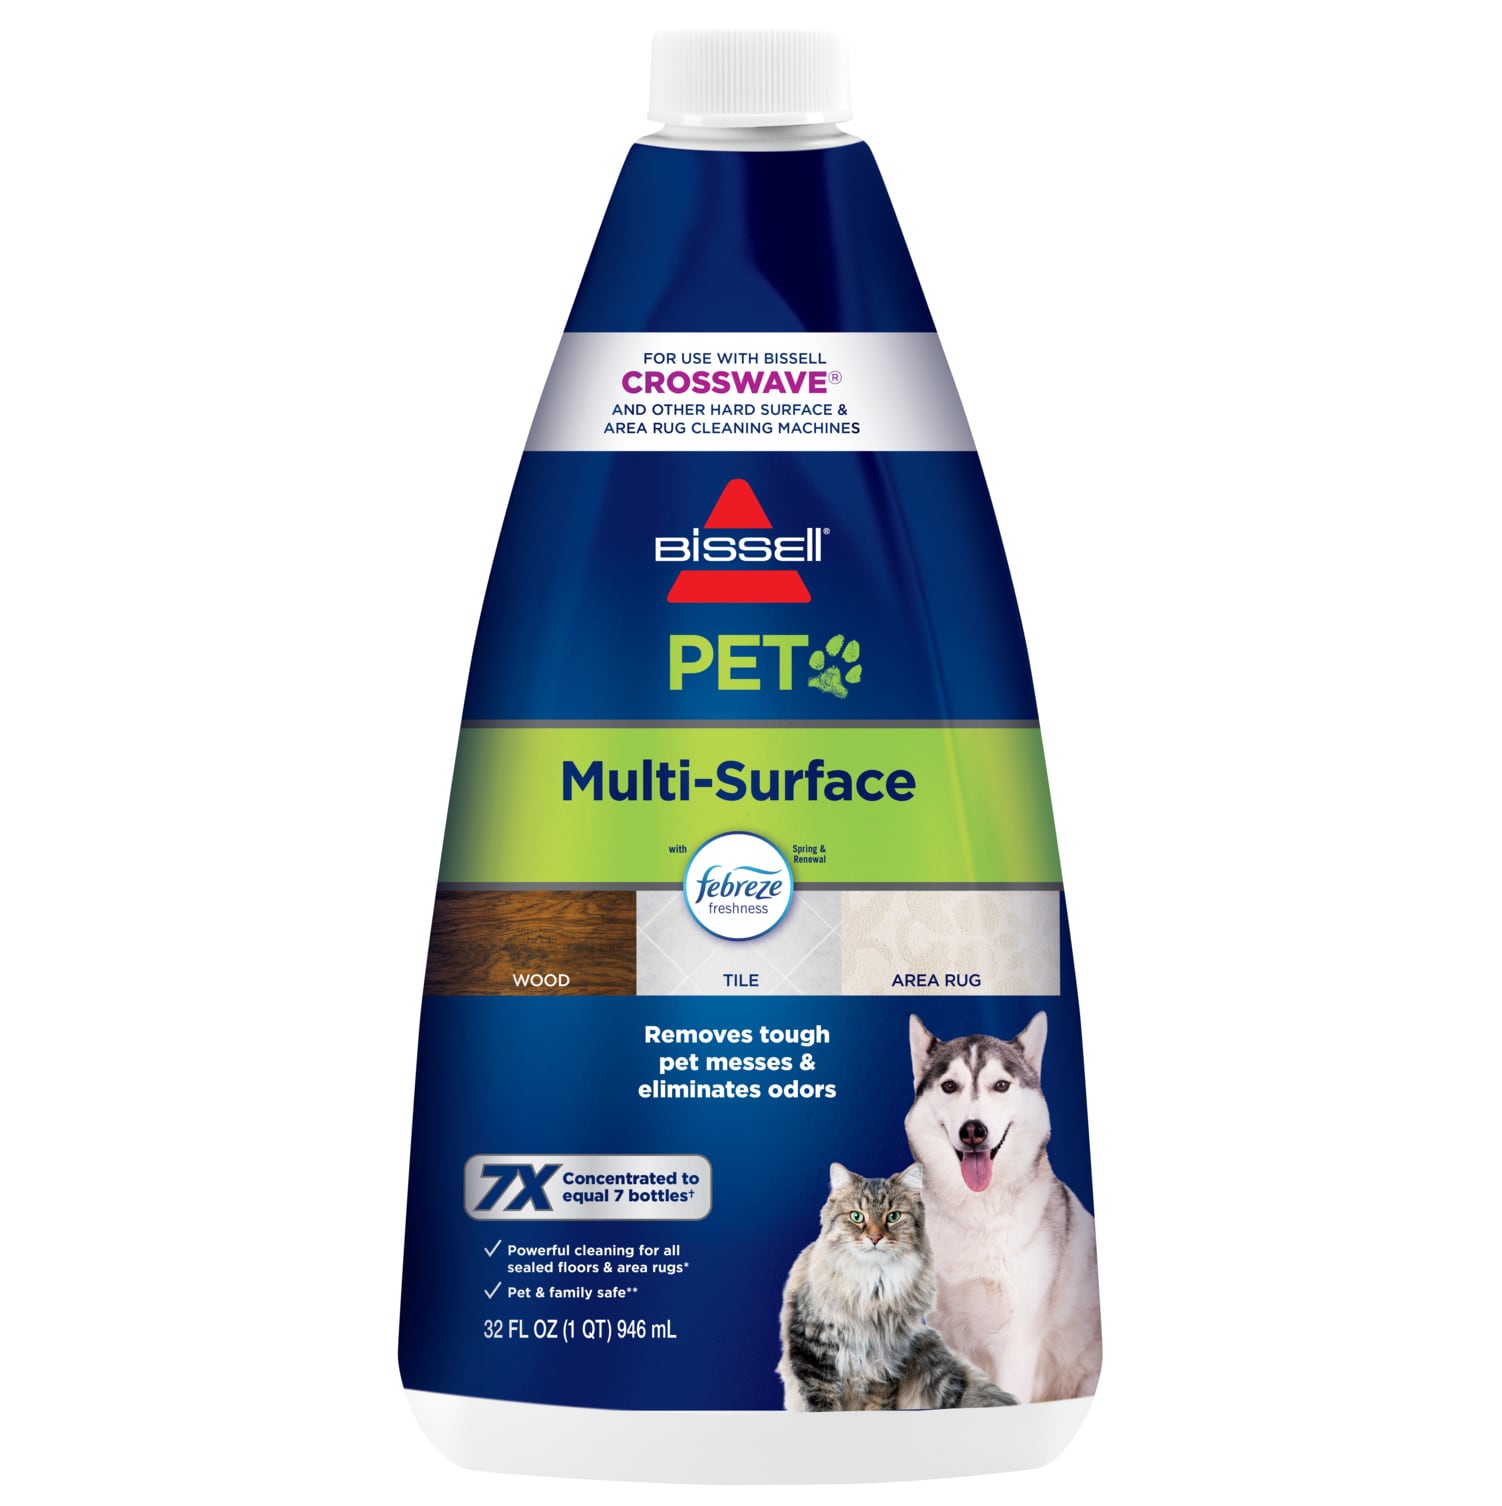 Hard pet. Bissell Pet запчасти. BUISSELL natural Multi surface Floor Cleaning solution. Биссел Мульти сурфейс спрей оранжевая банка.